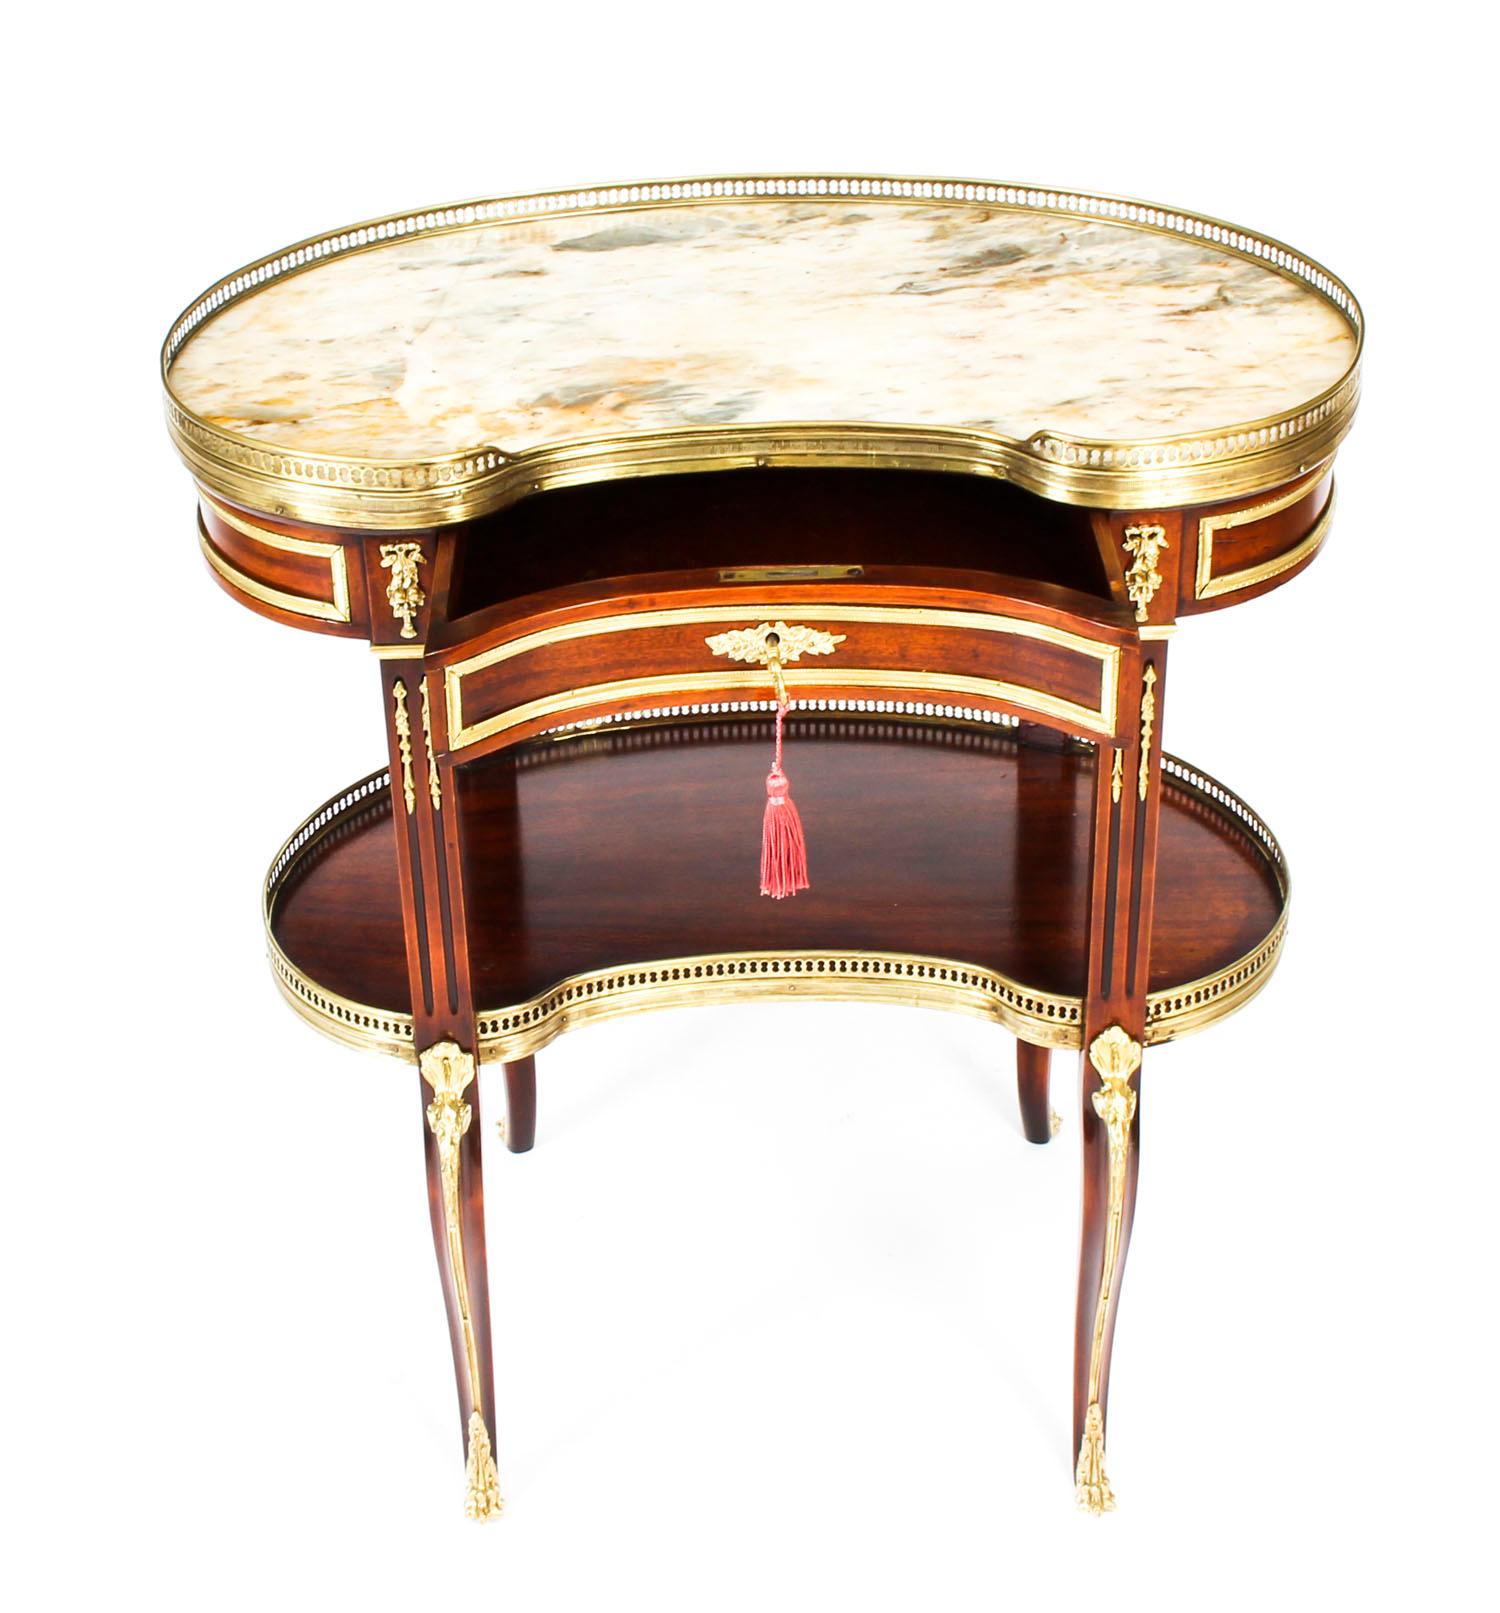 French Louis XVI Revival Kidney Shaped Marble-Top Side Table, 19th Century 8